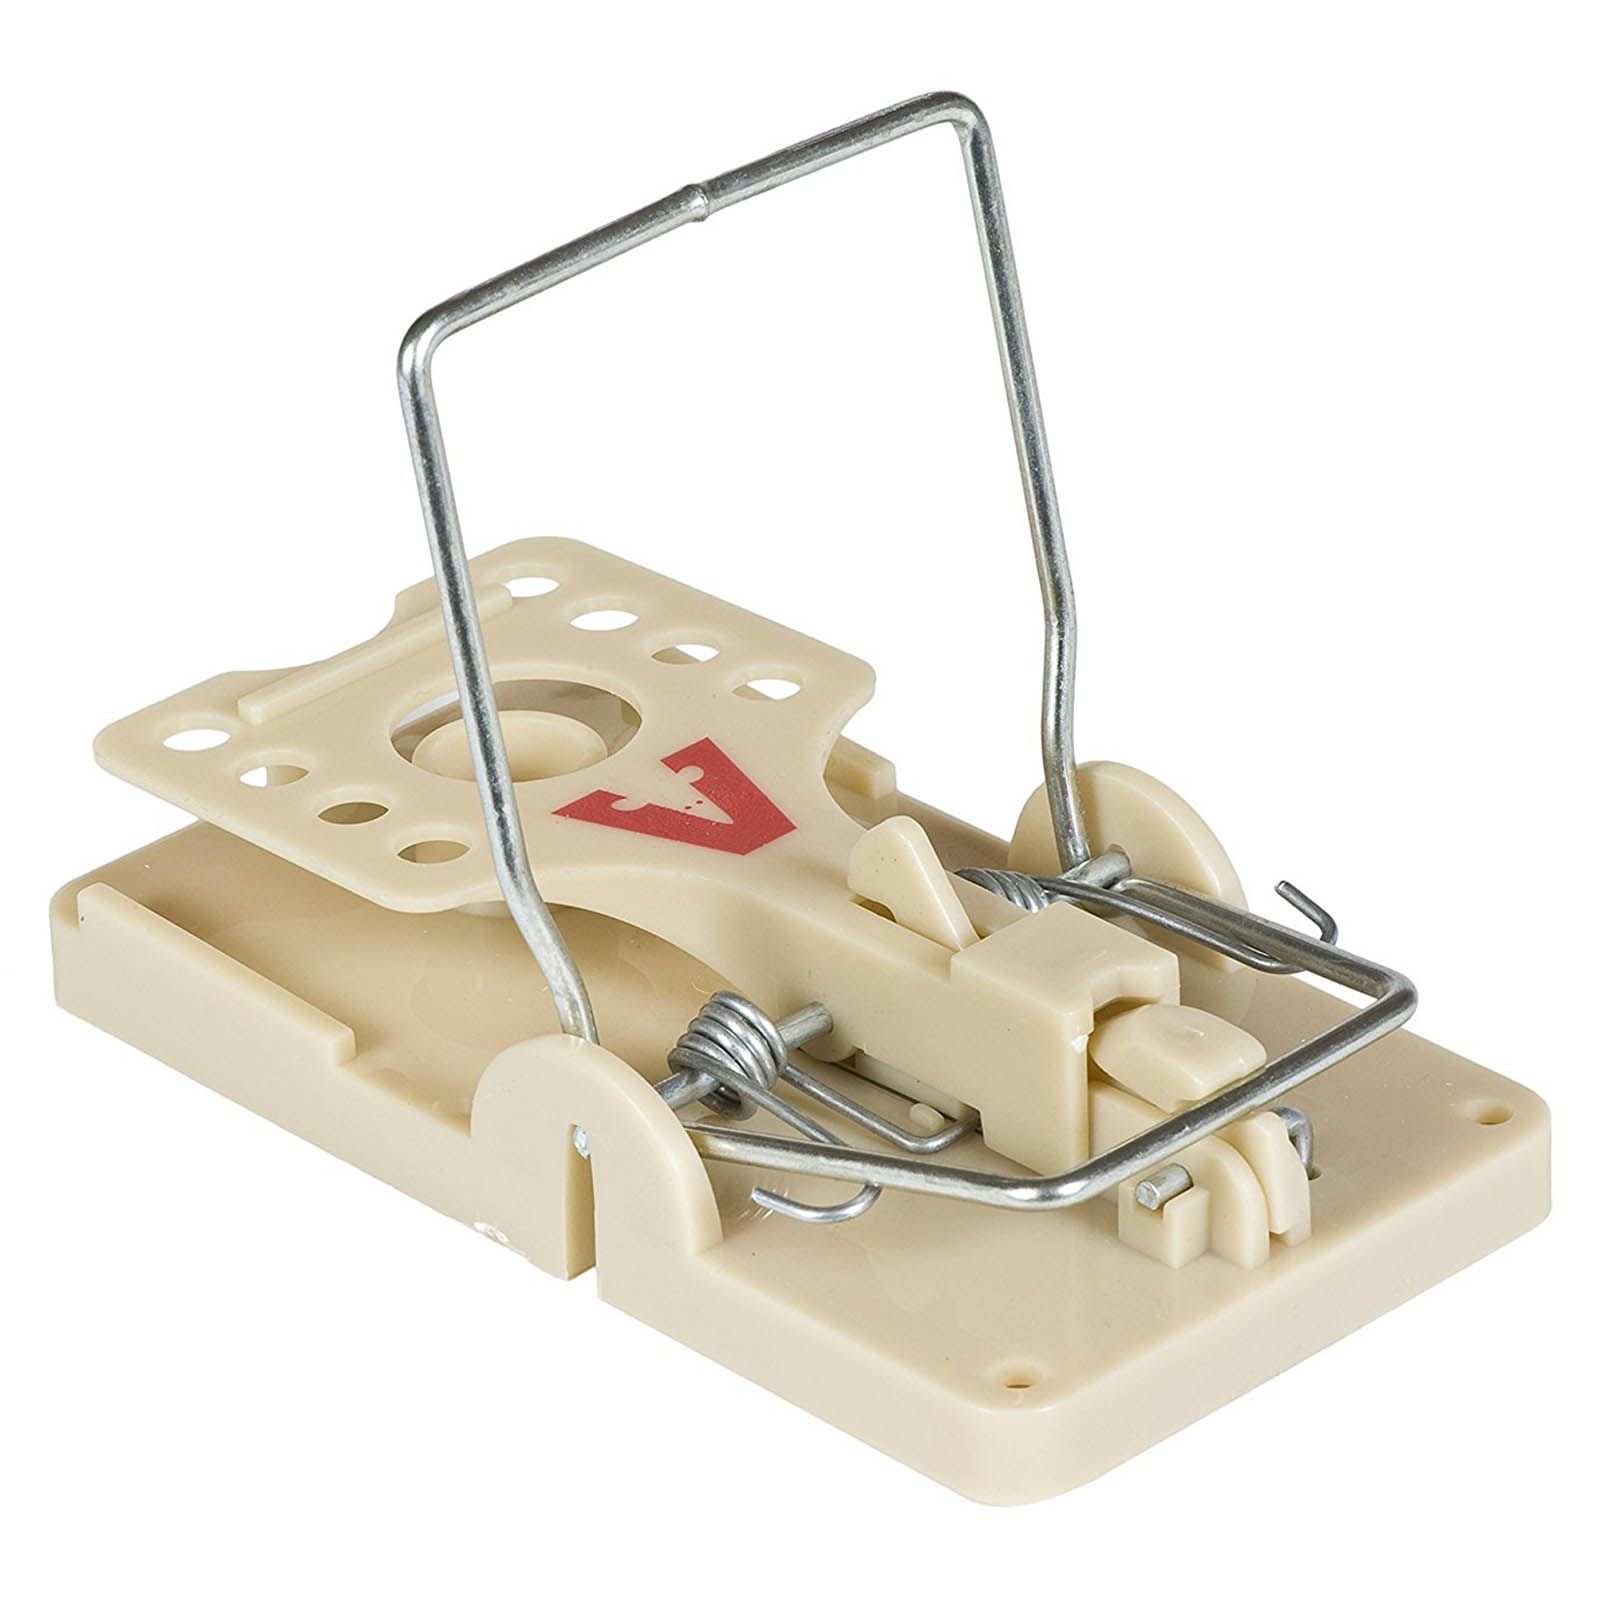 Victor Mouse Trap - FREE SHIPPING